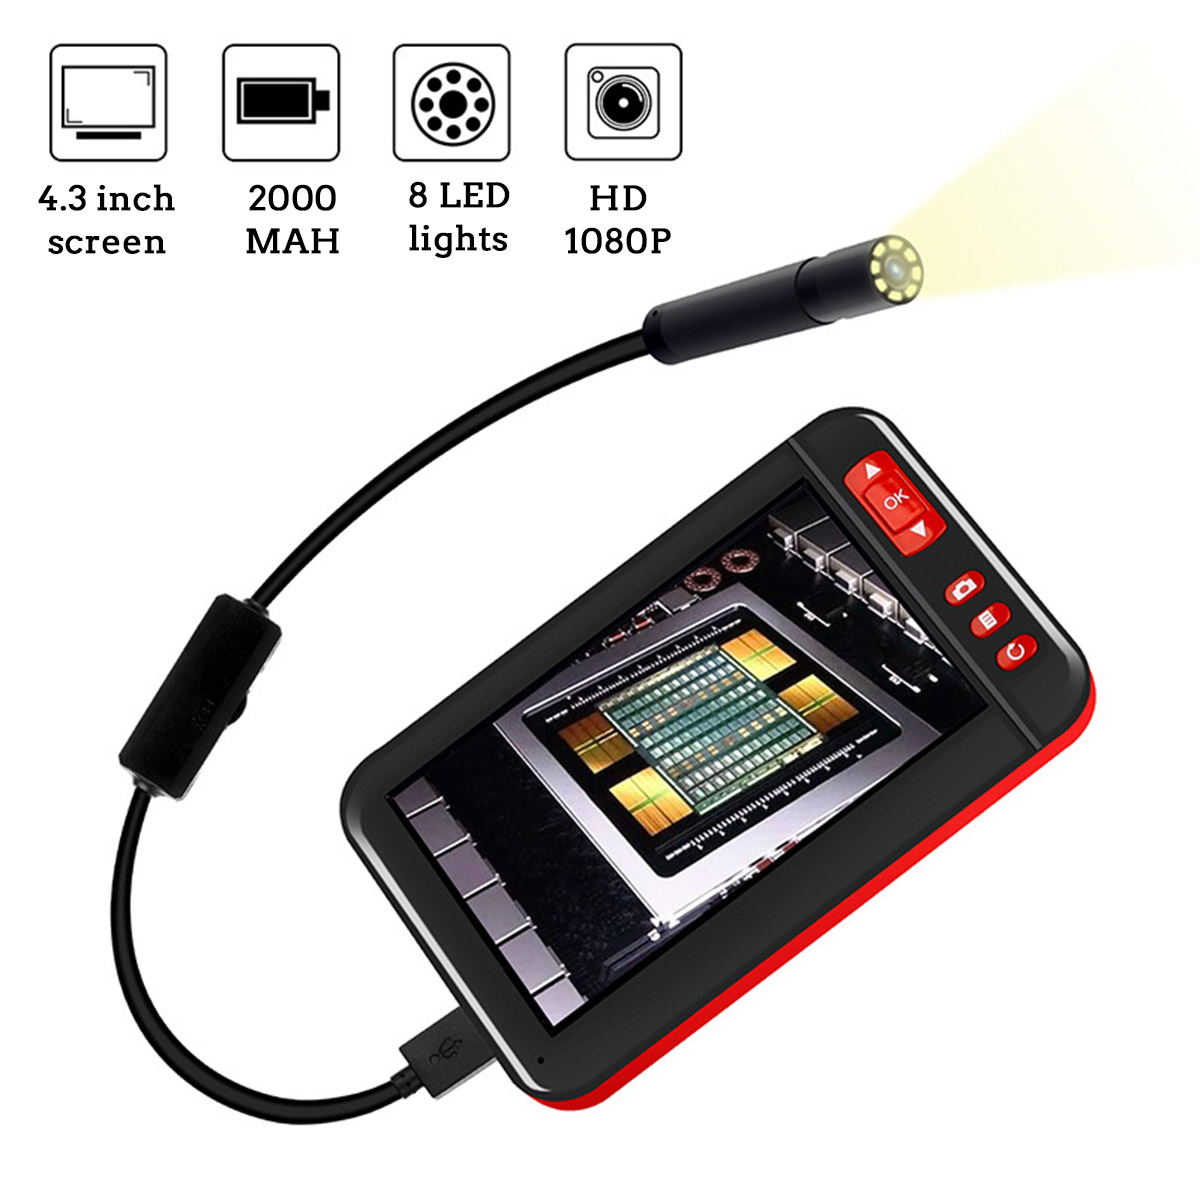 43-Inch-Mini-Endo-scope-Camera-1080P-USB-Cable-Inspection-Camcorder-for-Auto-Repair-Industrial-Flexi-1610124-3